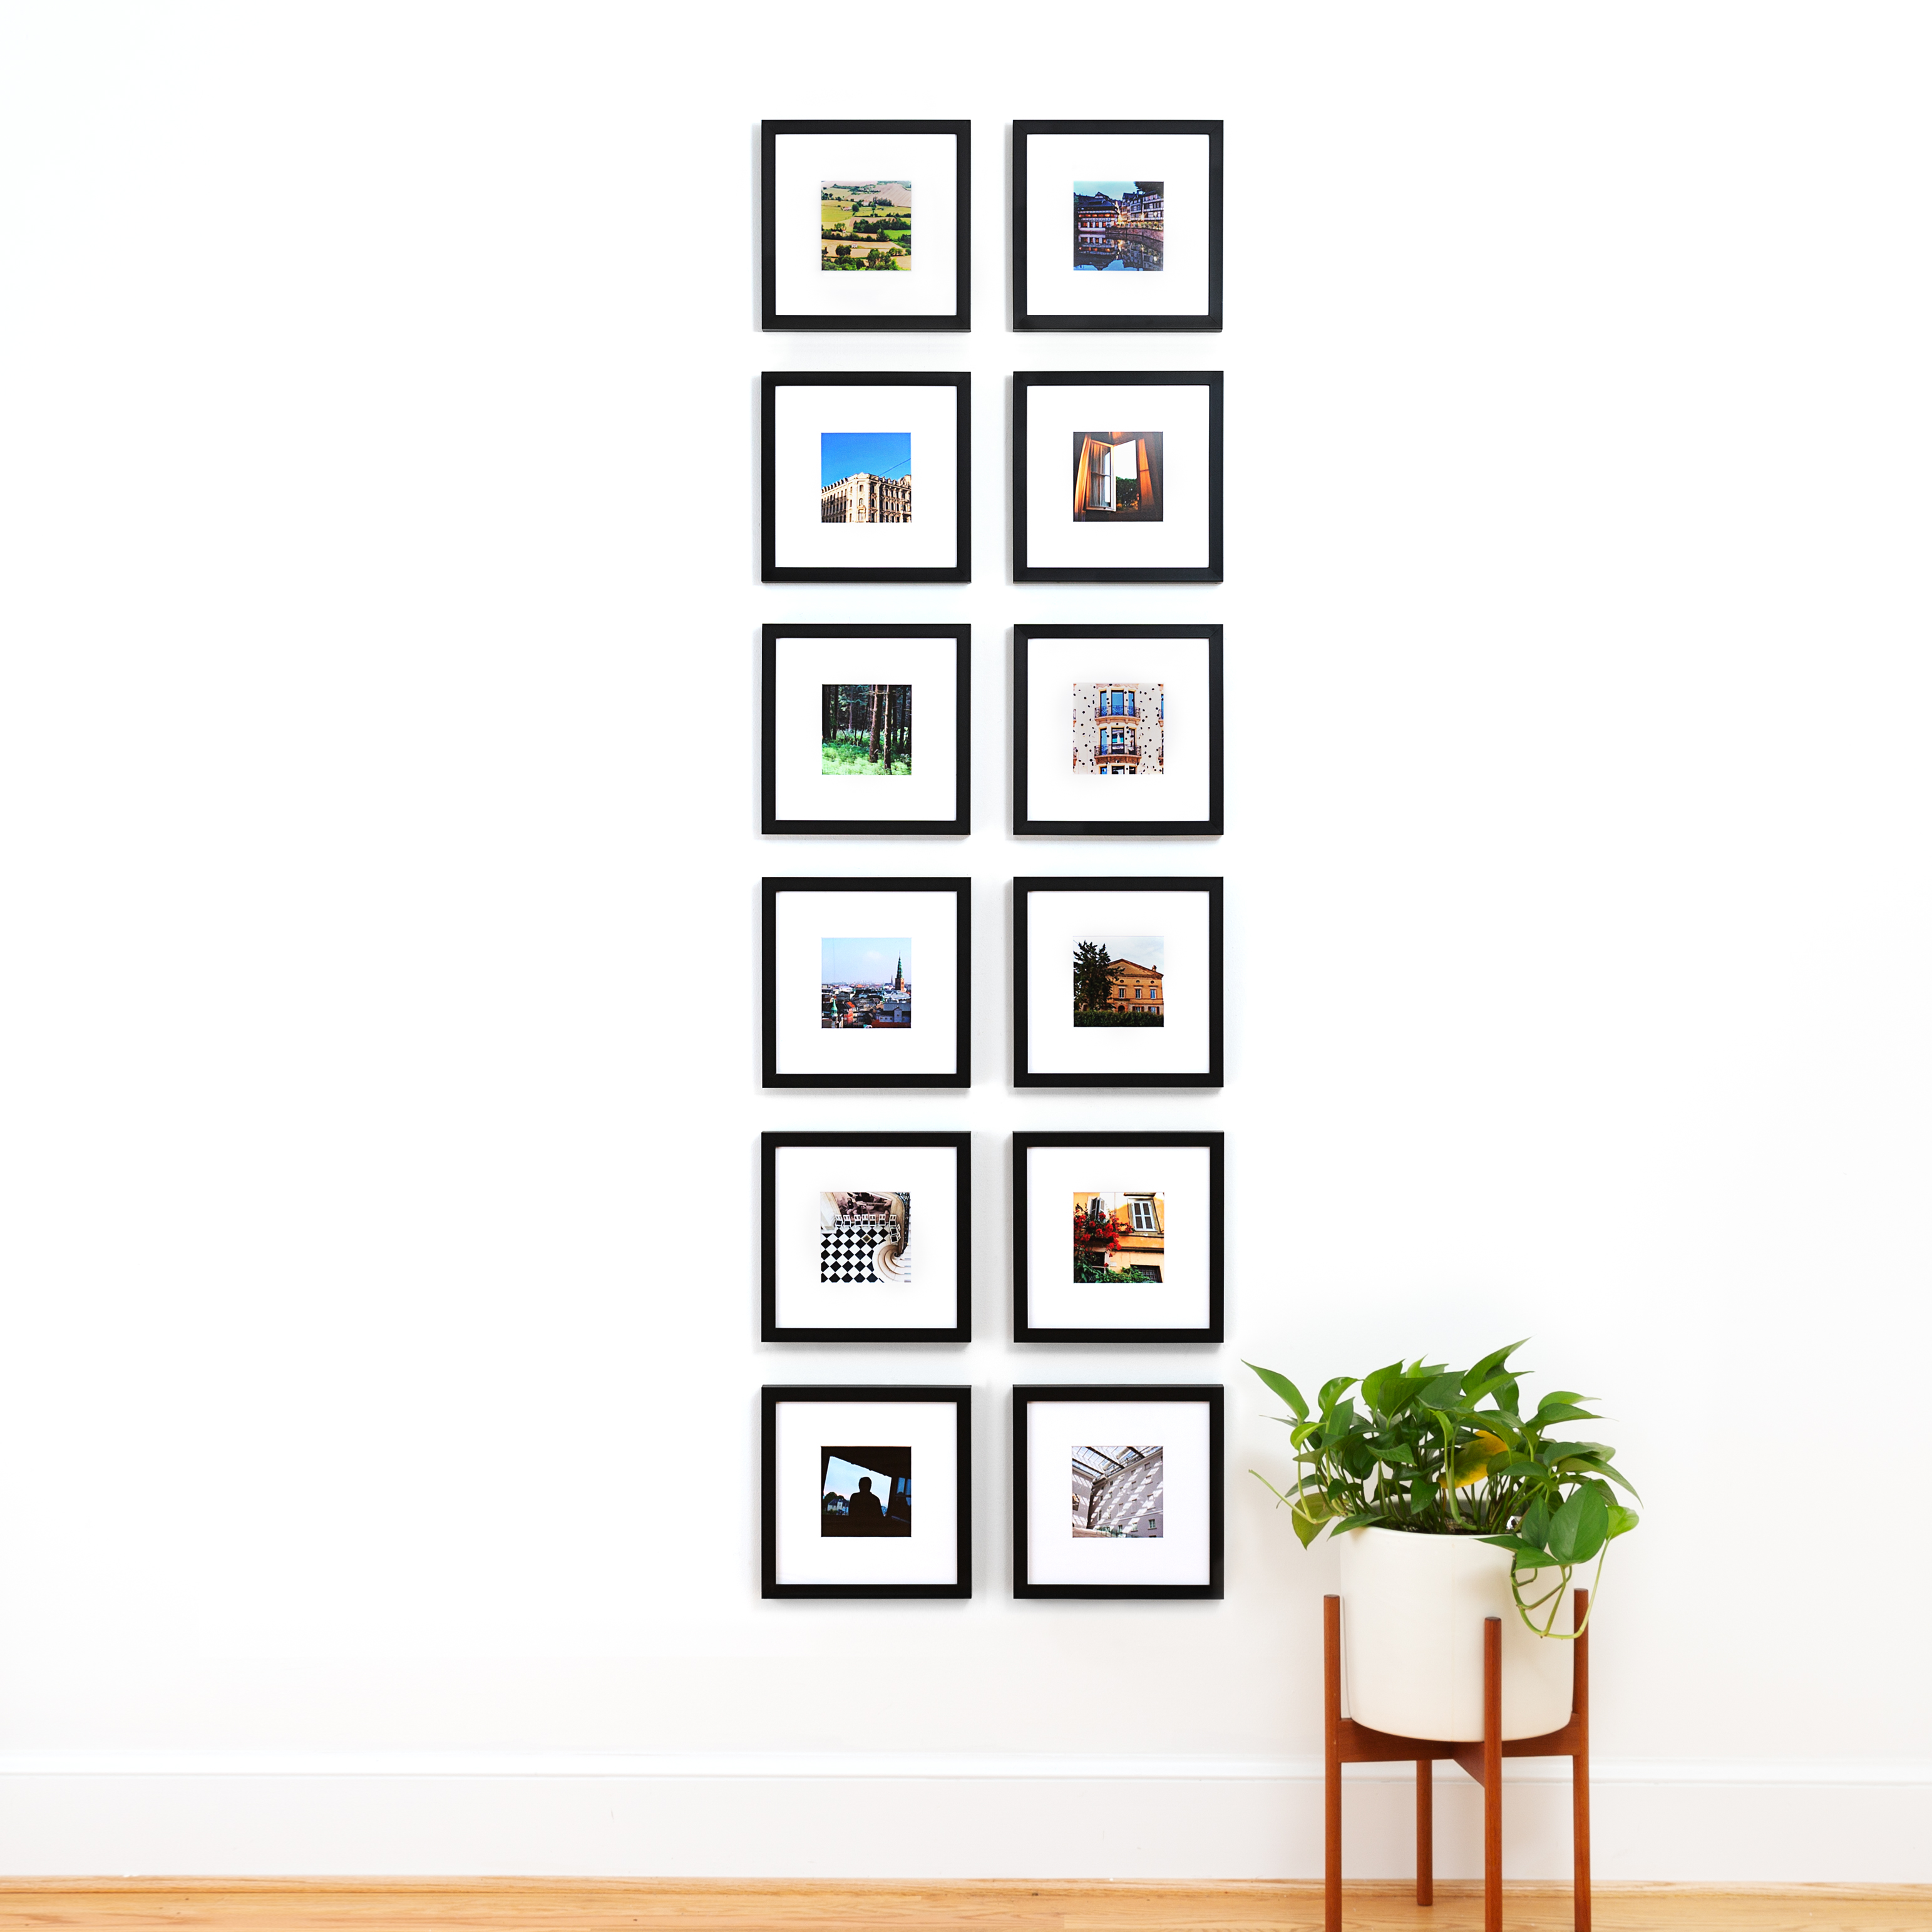 12 small frames arranged in two rows for a tall, skinny gallery wall